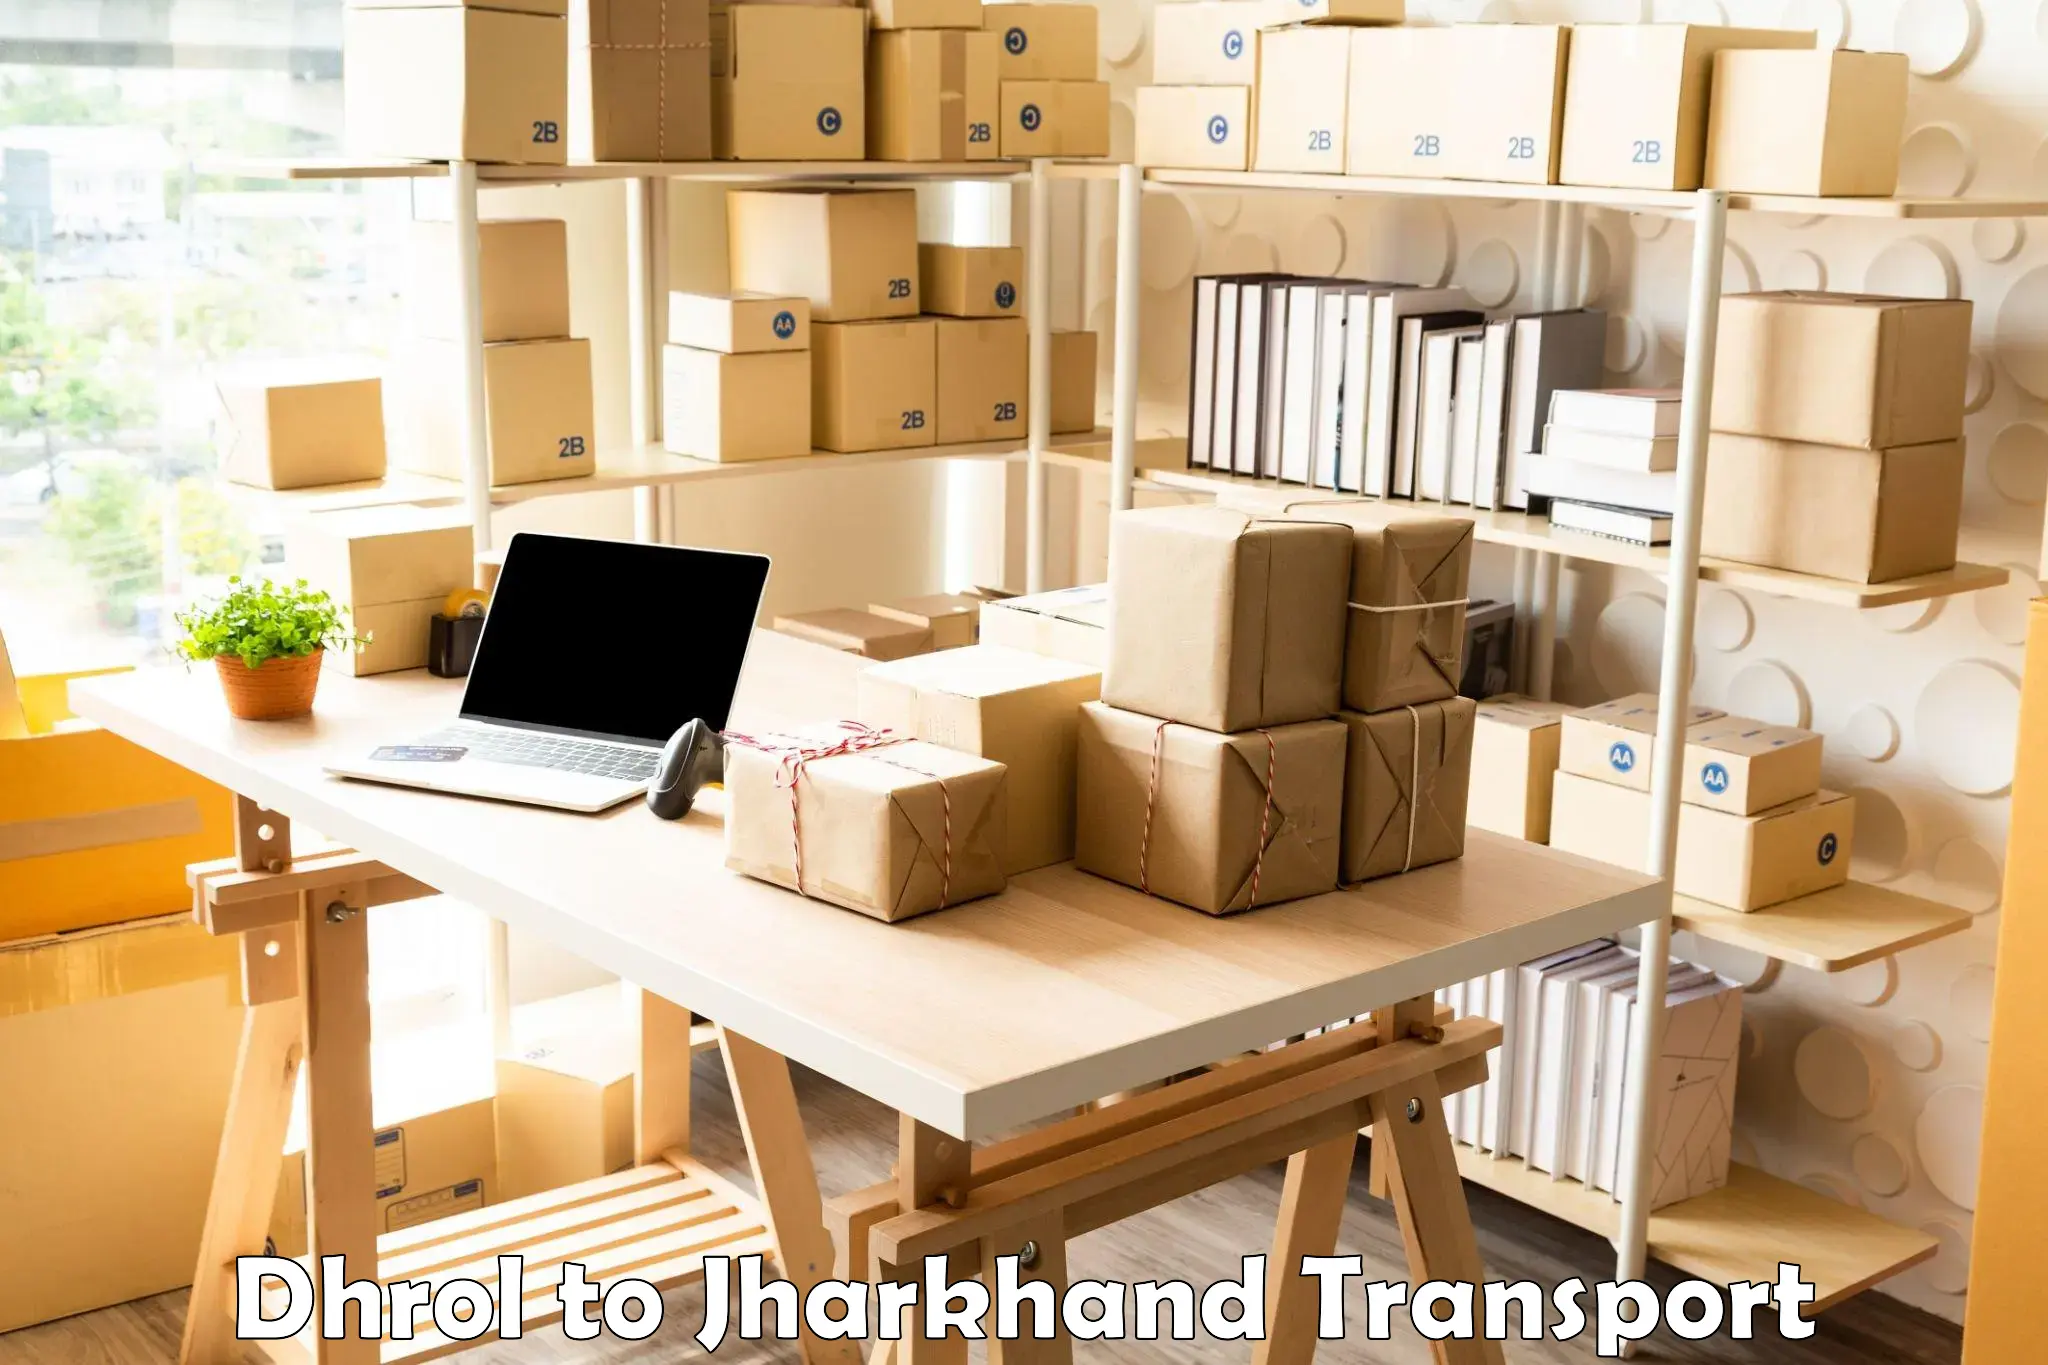 Air cargo transport services Dhrol to IIT Dhanbad